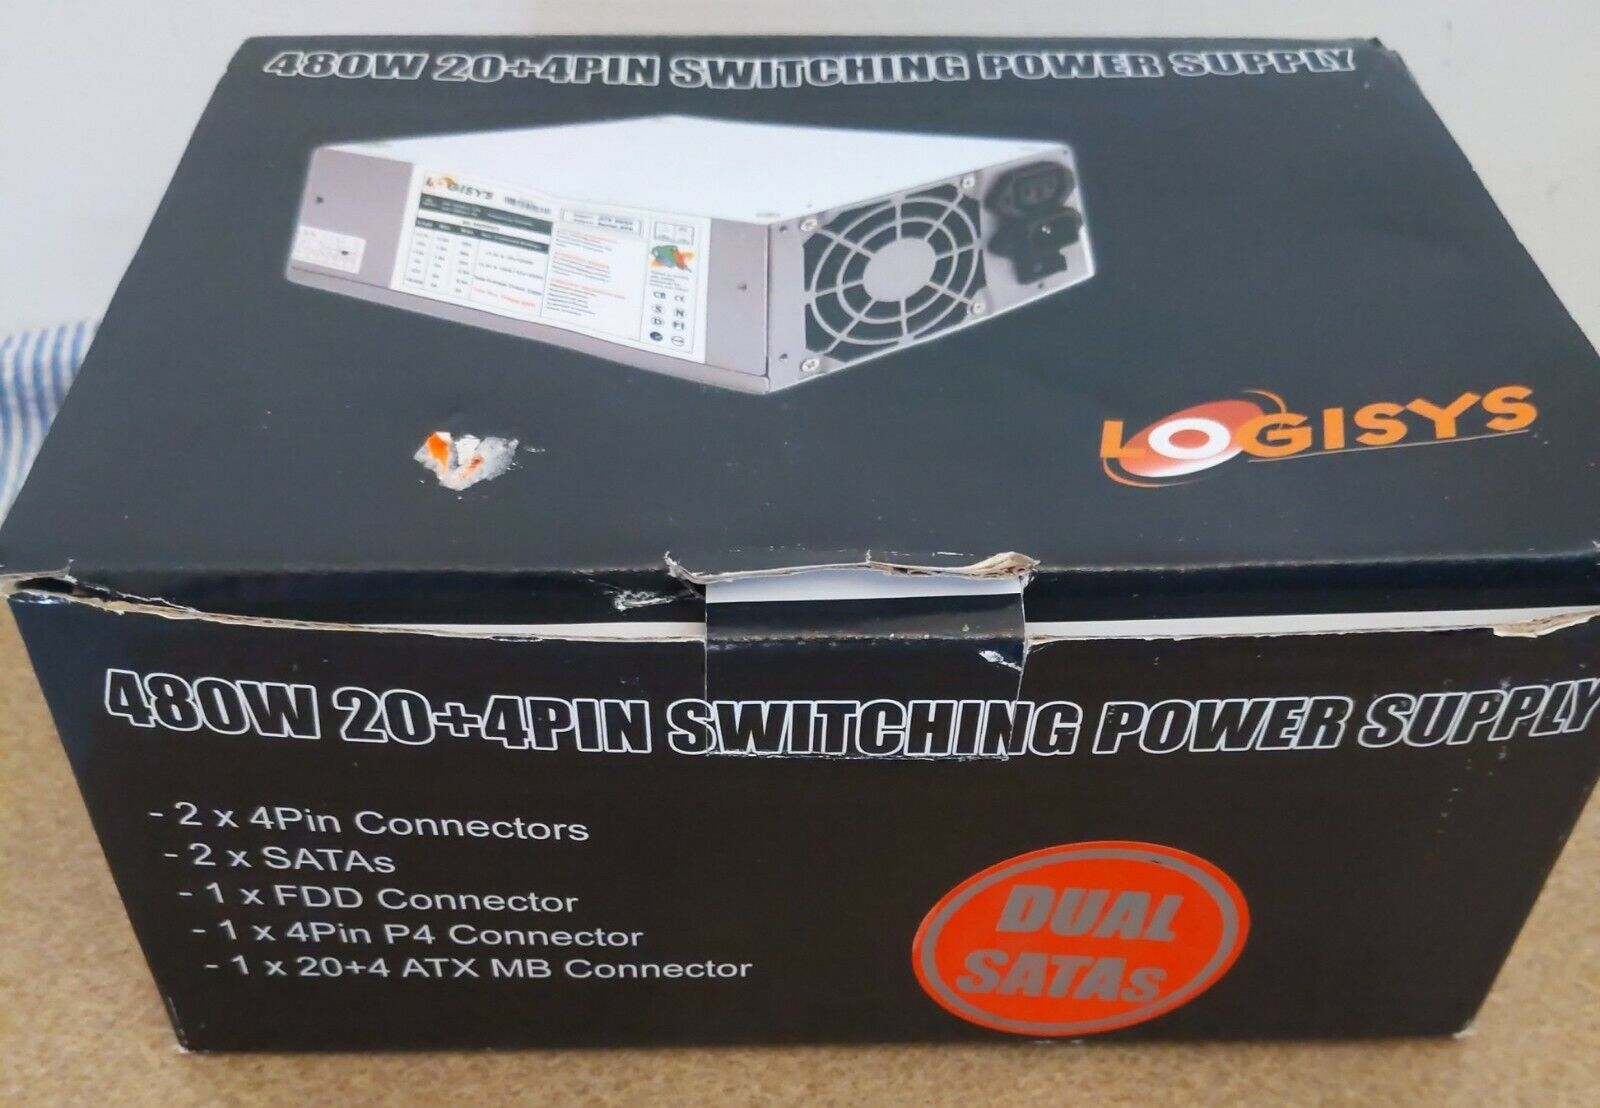 Logisys 480W 20+ 4 Pin Switching Power Supply DC Output